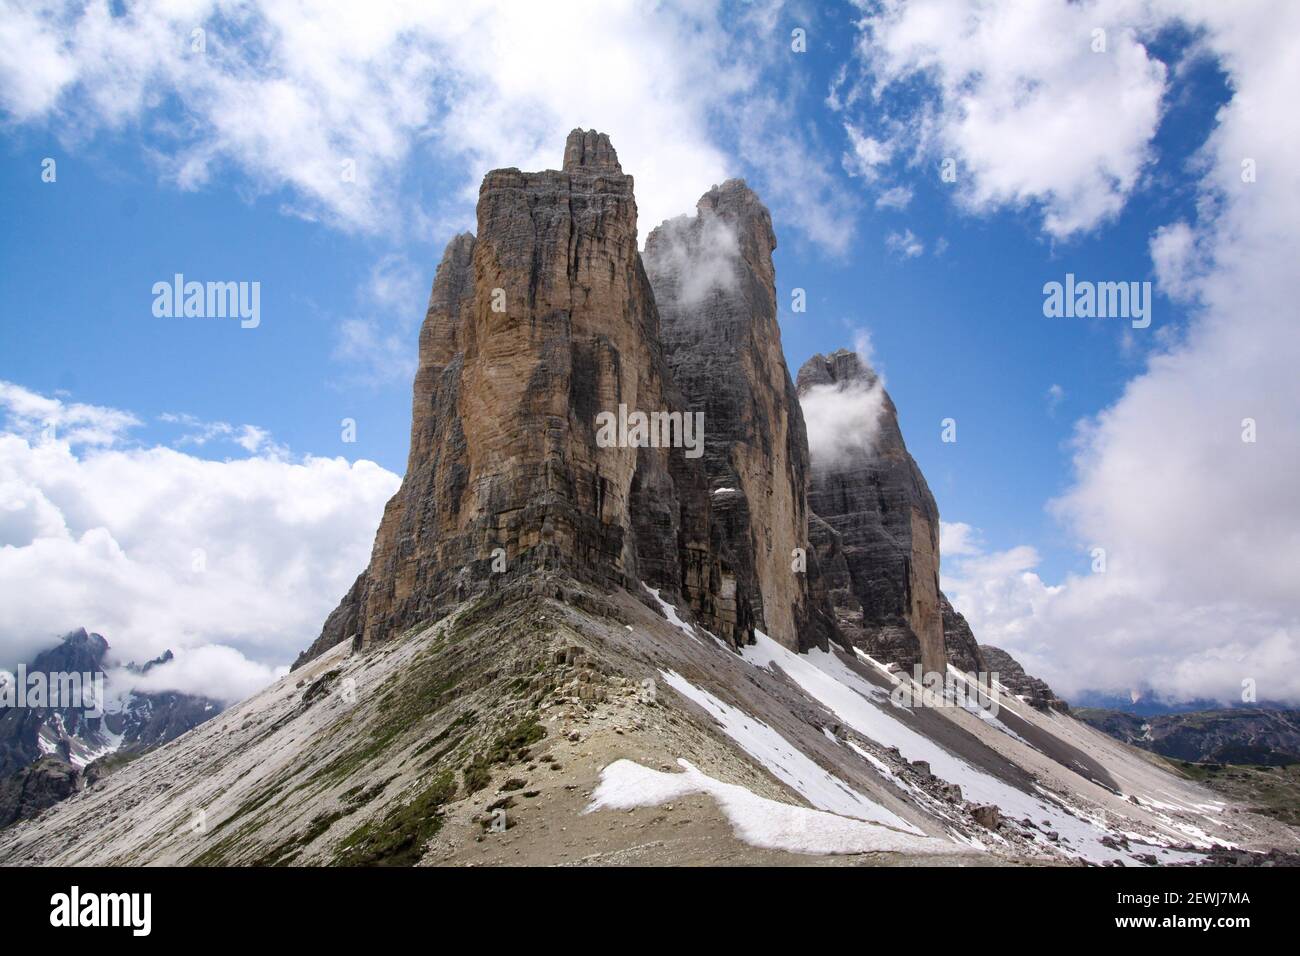 Mountain stock in Dolomites with rock towers as a summit in front of blue sky. Stock Photo